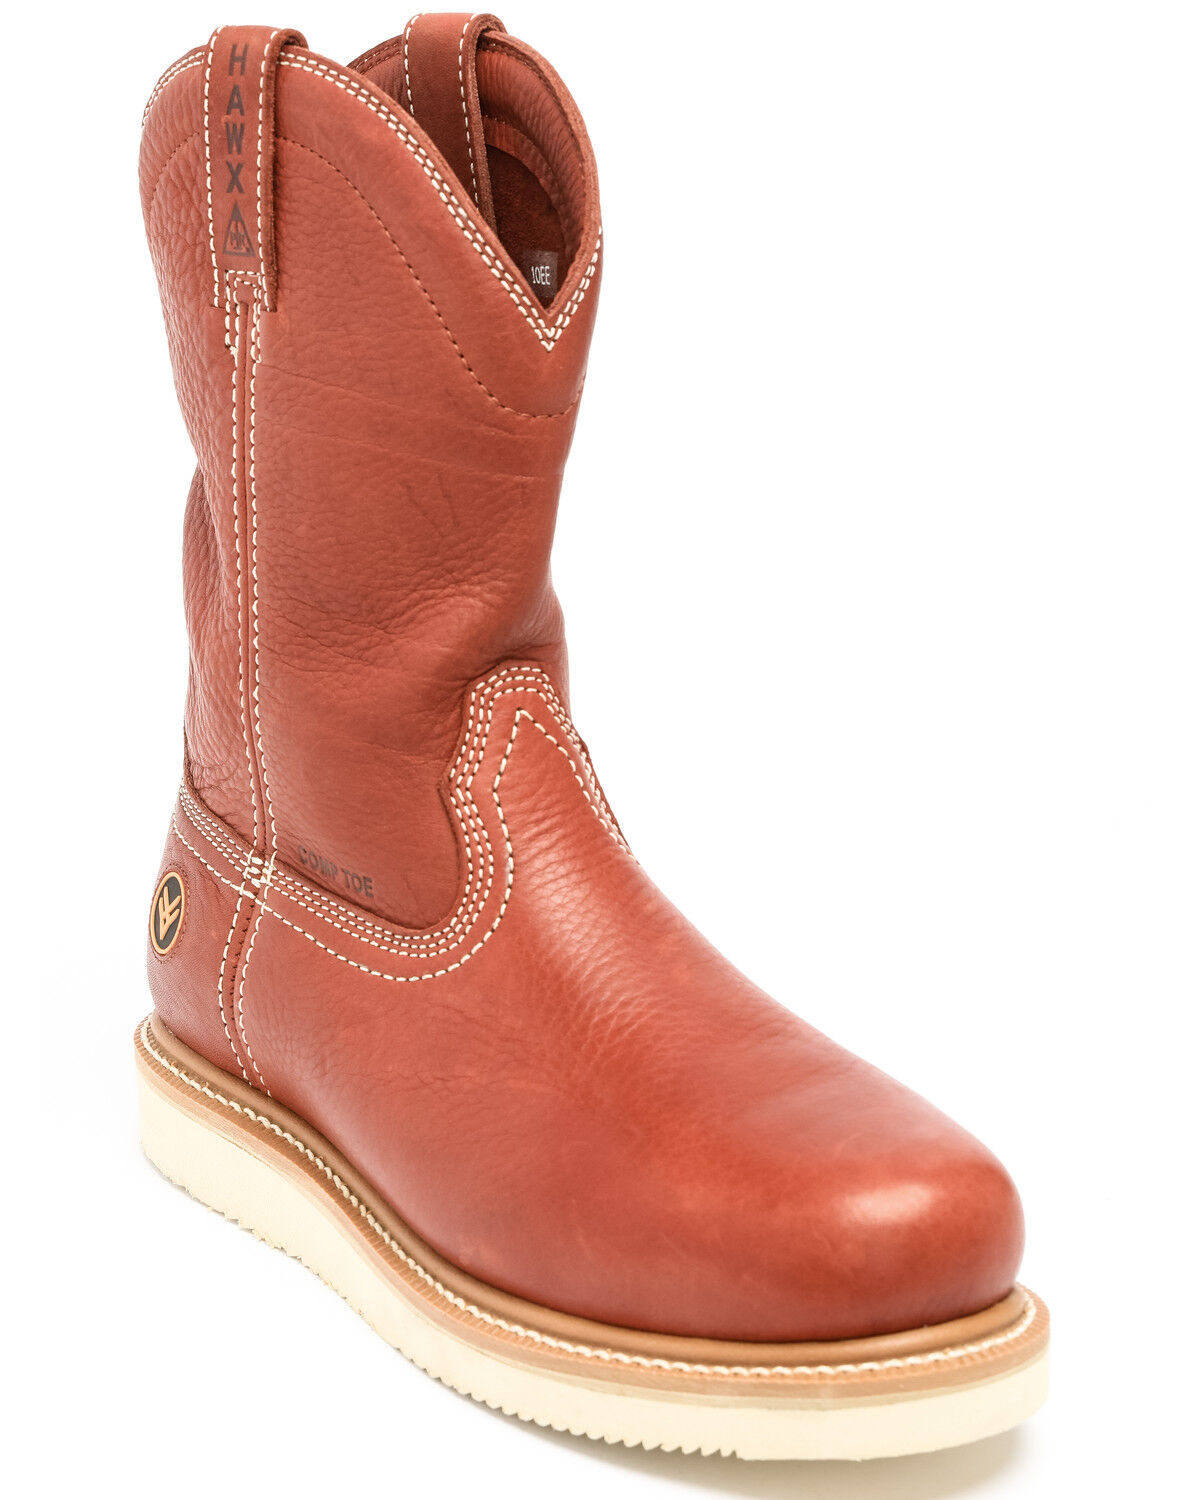 Hawx Men's Wedge Pull-On Work Boots 